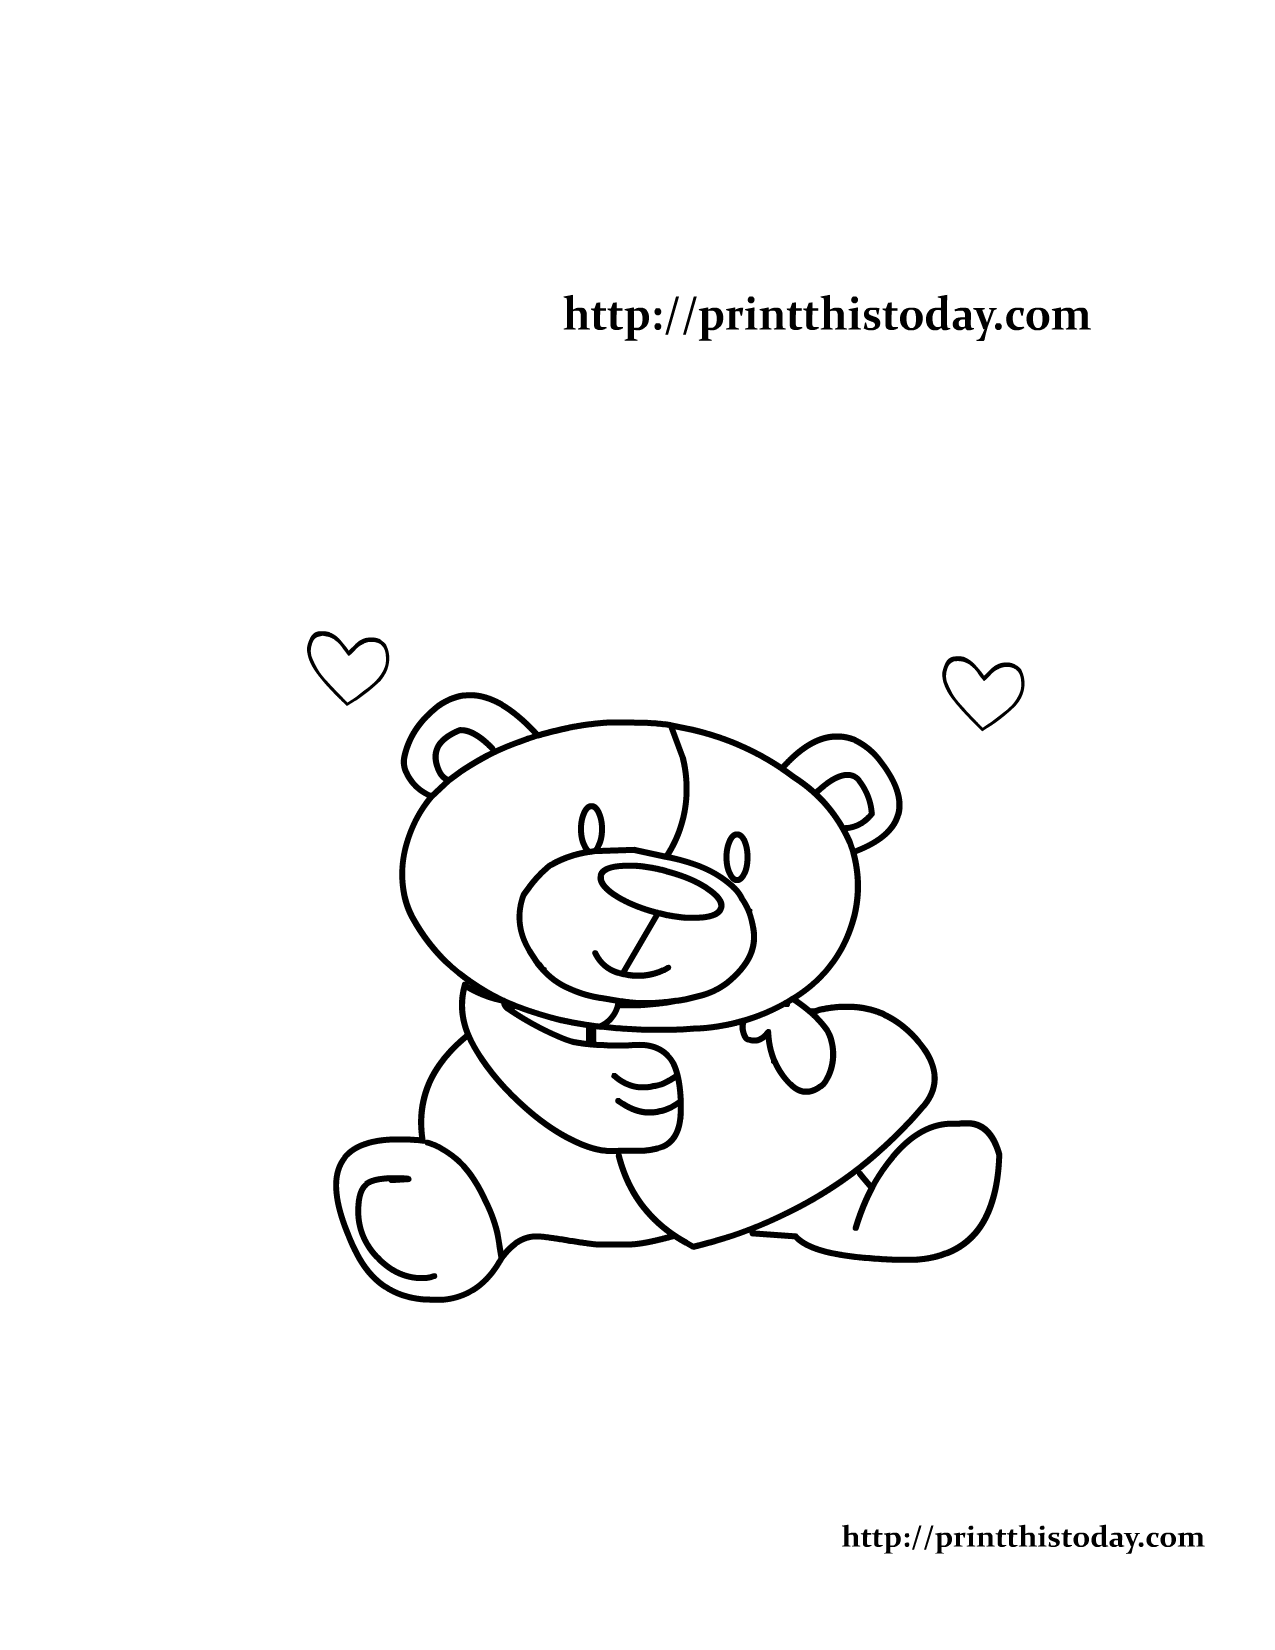 Teddy Bear and Hearts Coloring Page